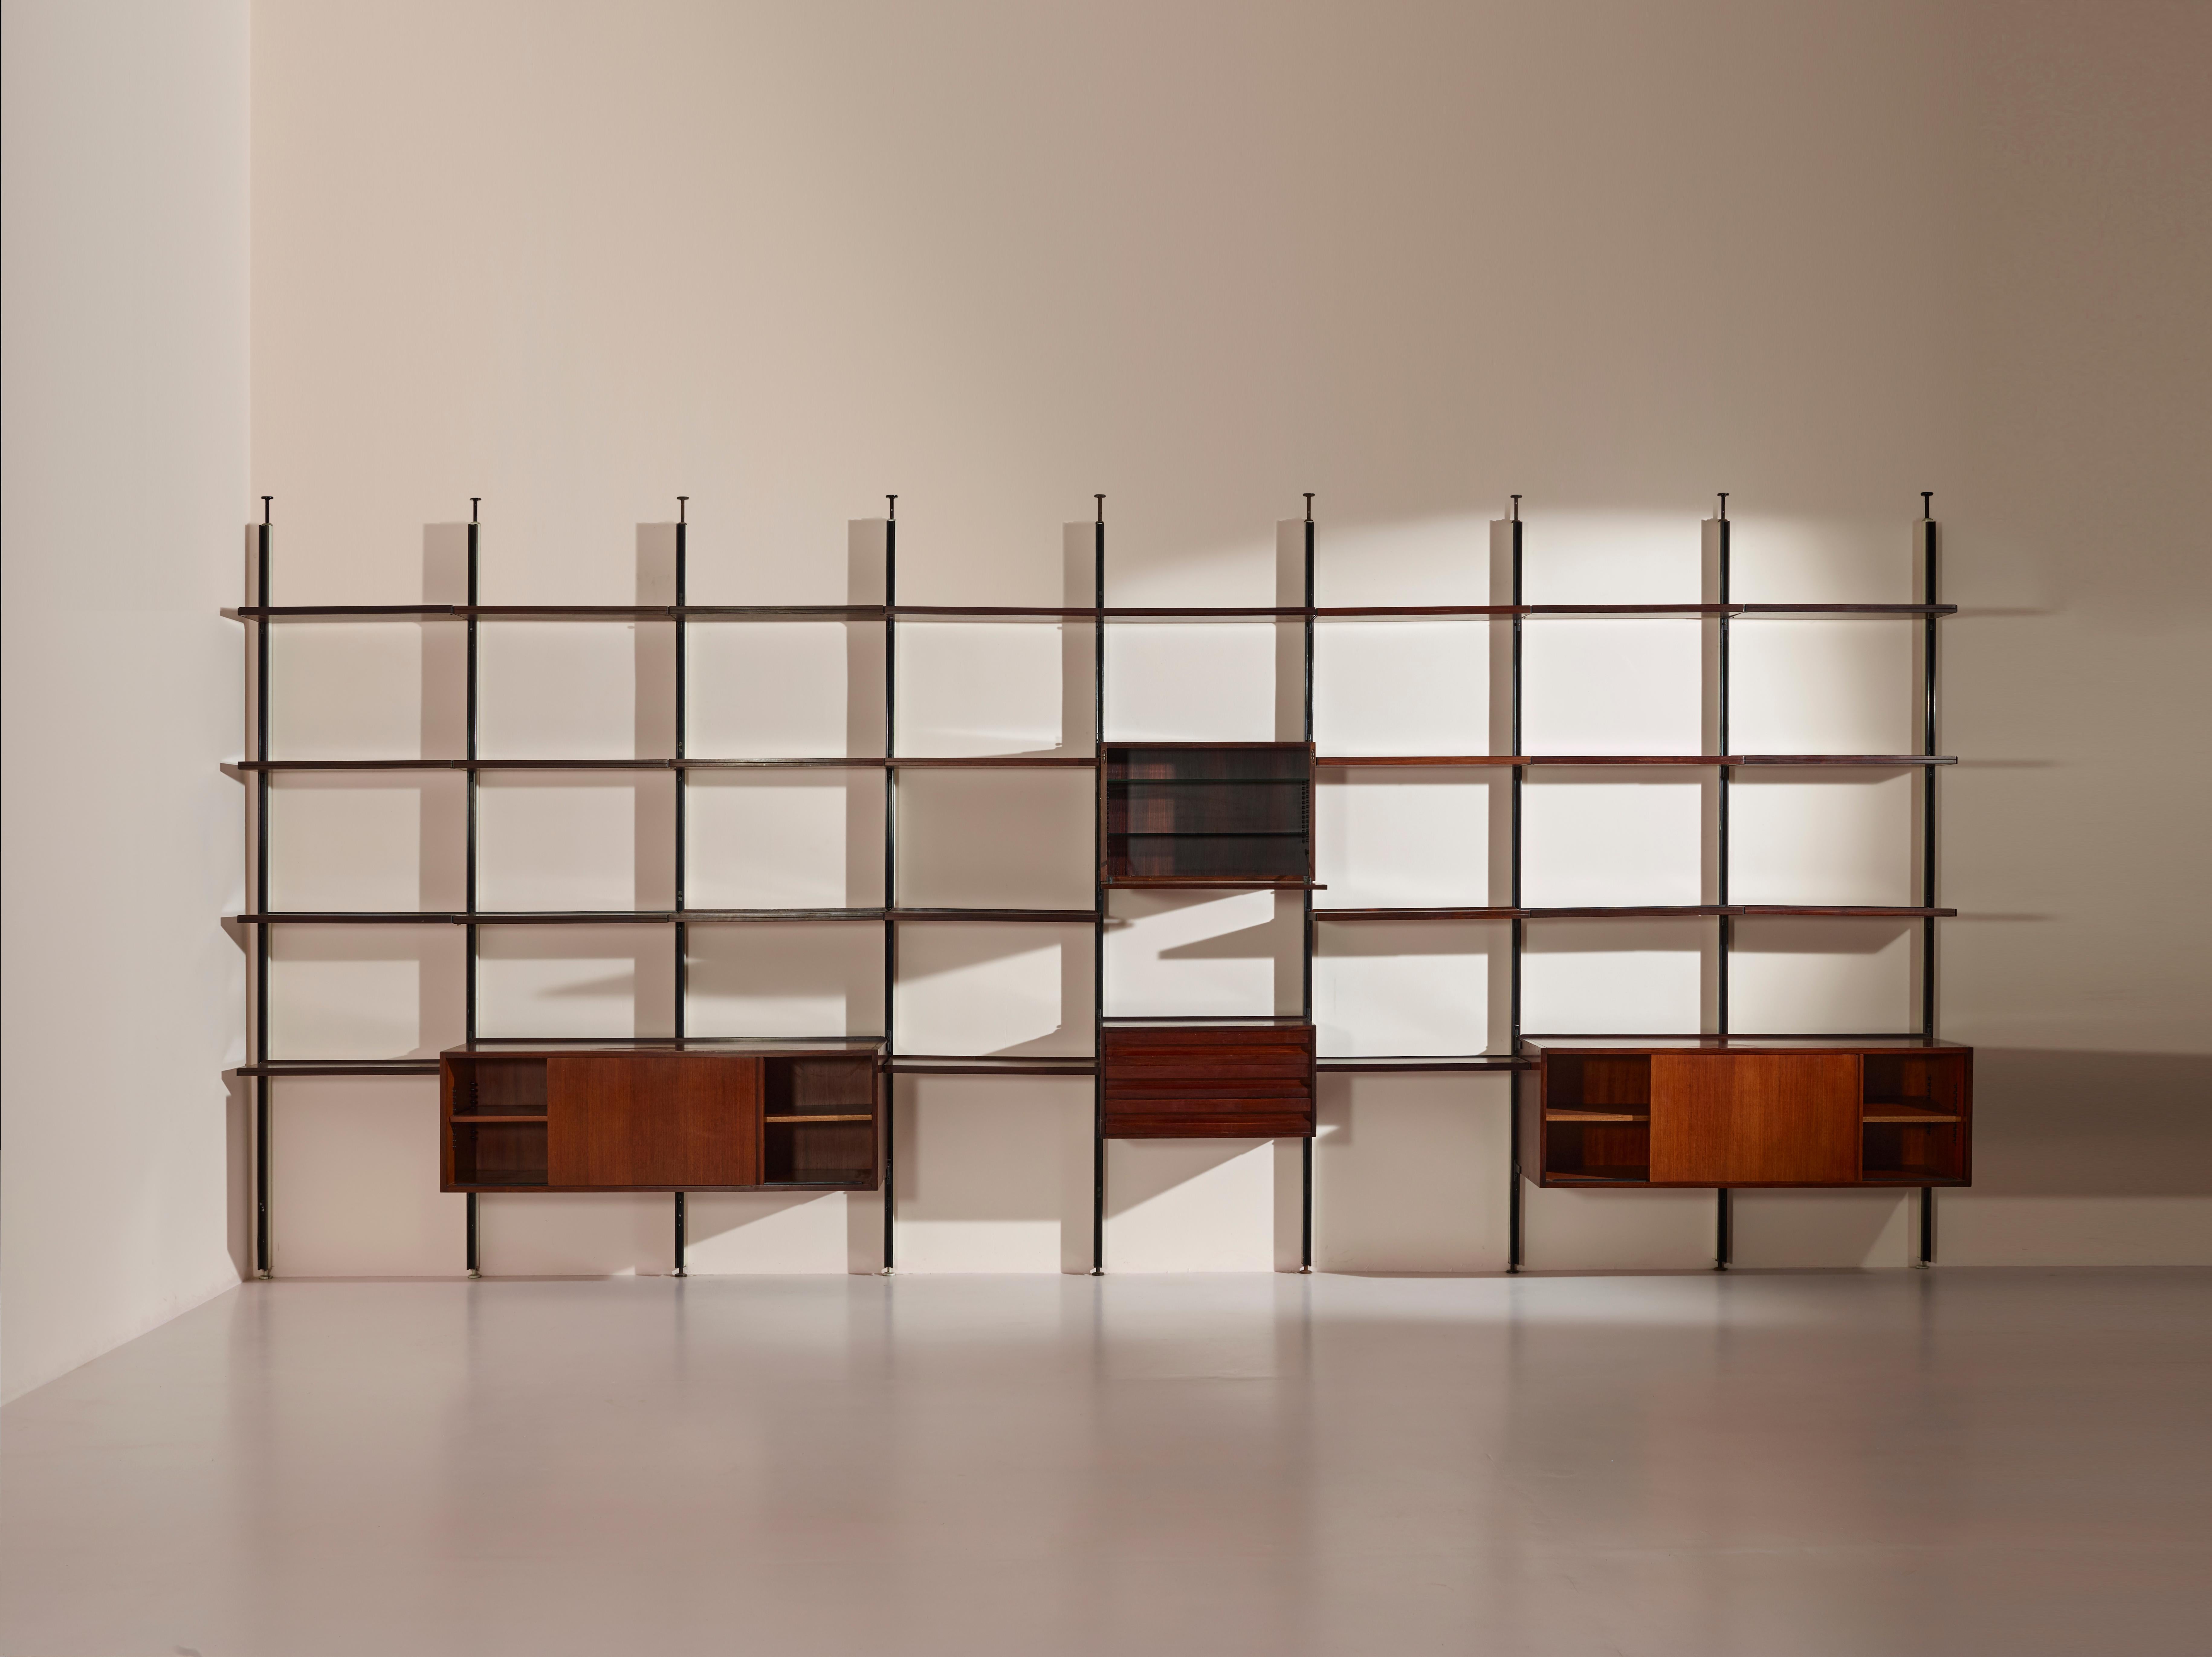 This large E22 bookcase or wall unit was designed by Osvaldo Borsani and manufactured by Tecno in the 1950s. It is constructed of metal, wood, and glass and measures 5.7 metres in width. The wall-mounted shelving unit consists of eight sections and